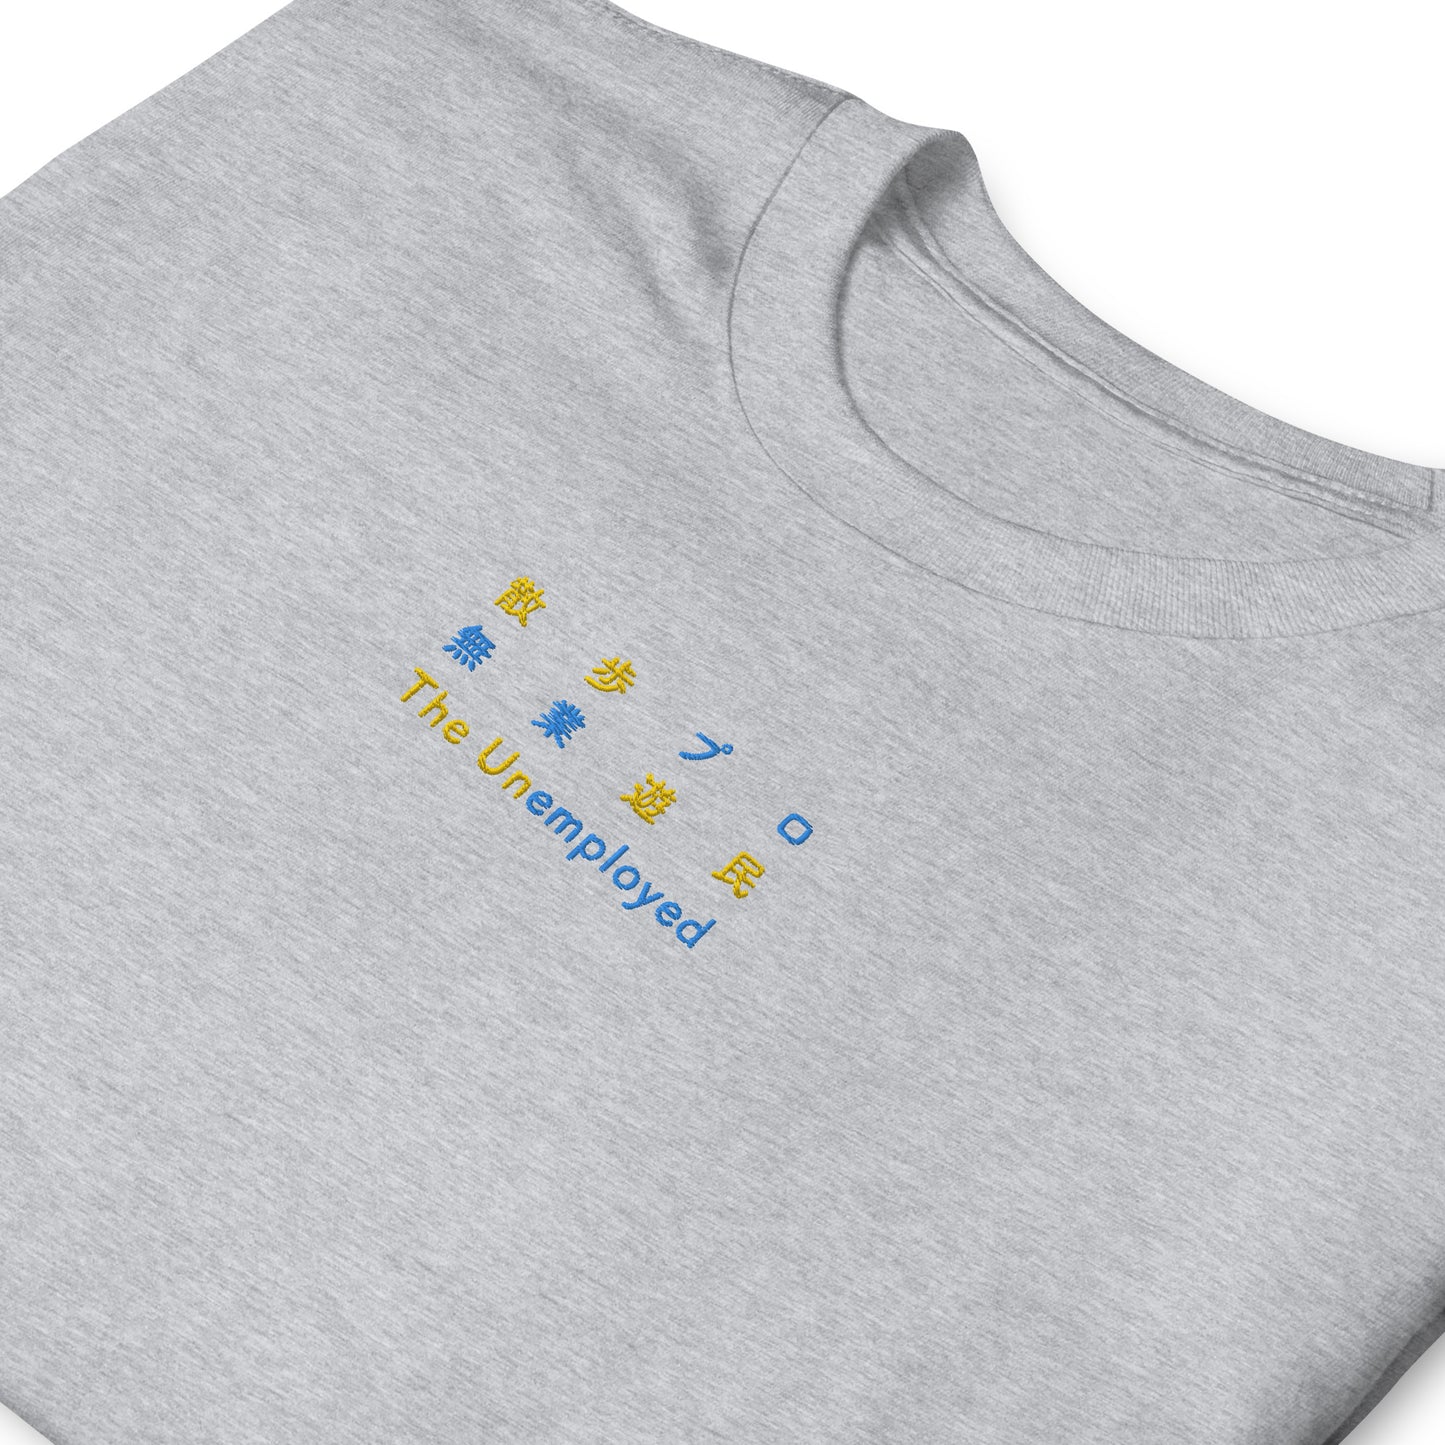 Light Gray High Quality Tee - Front Design with Yellow/Blue Embroidery "The Unemployed" in three languages